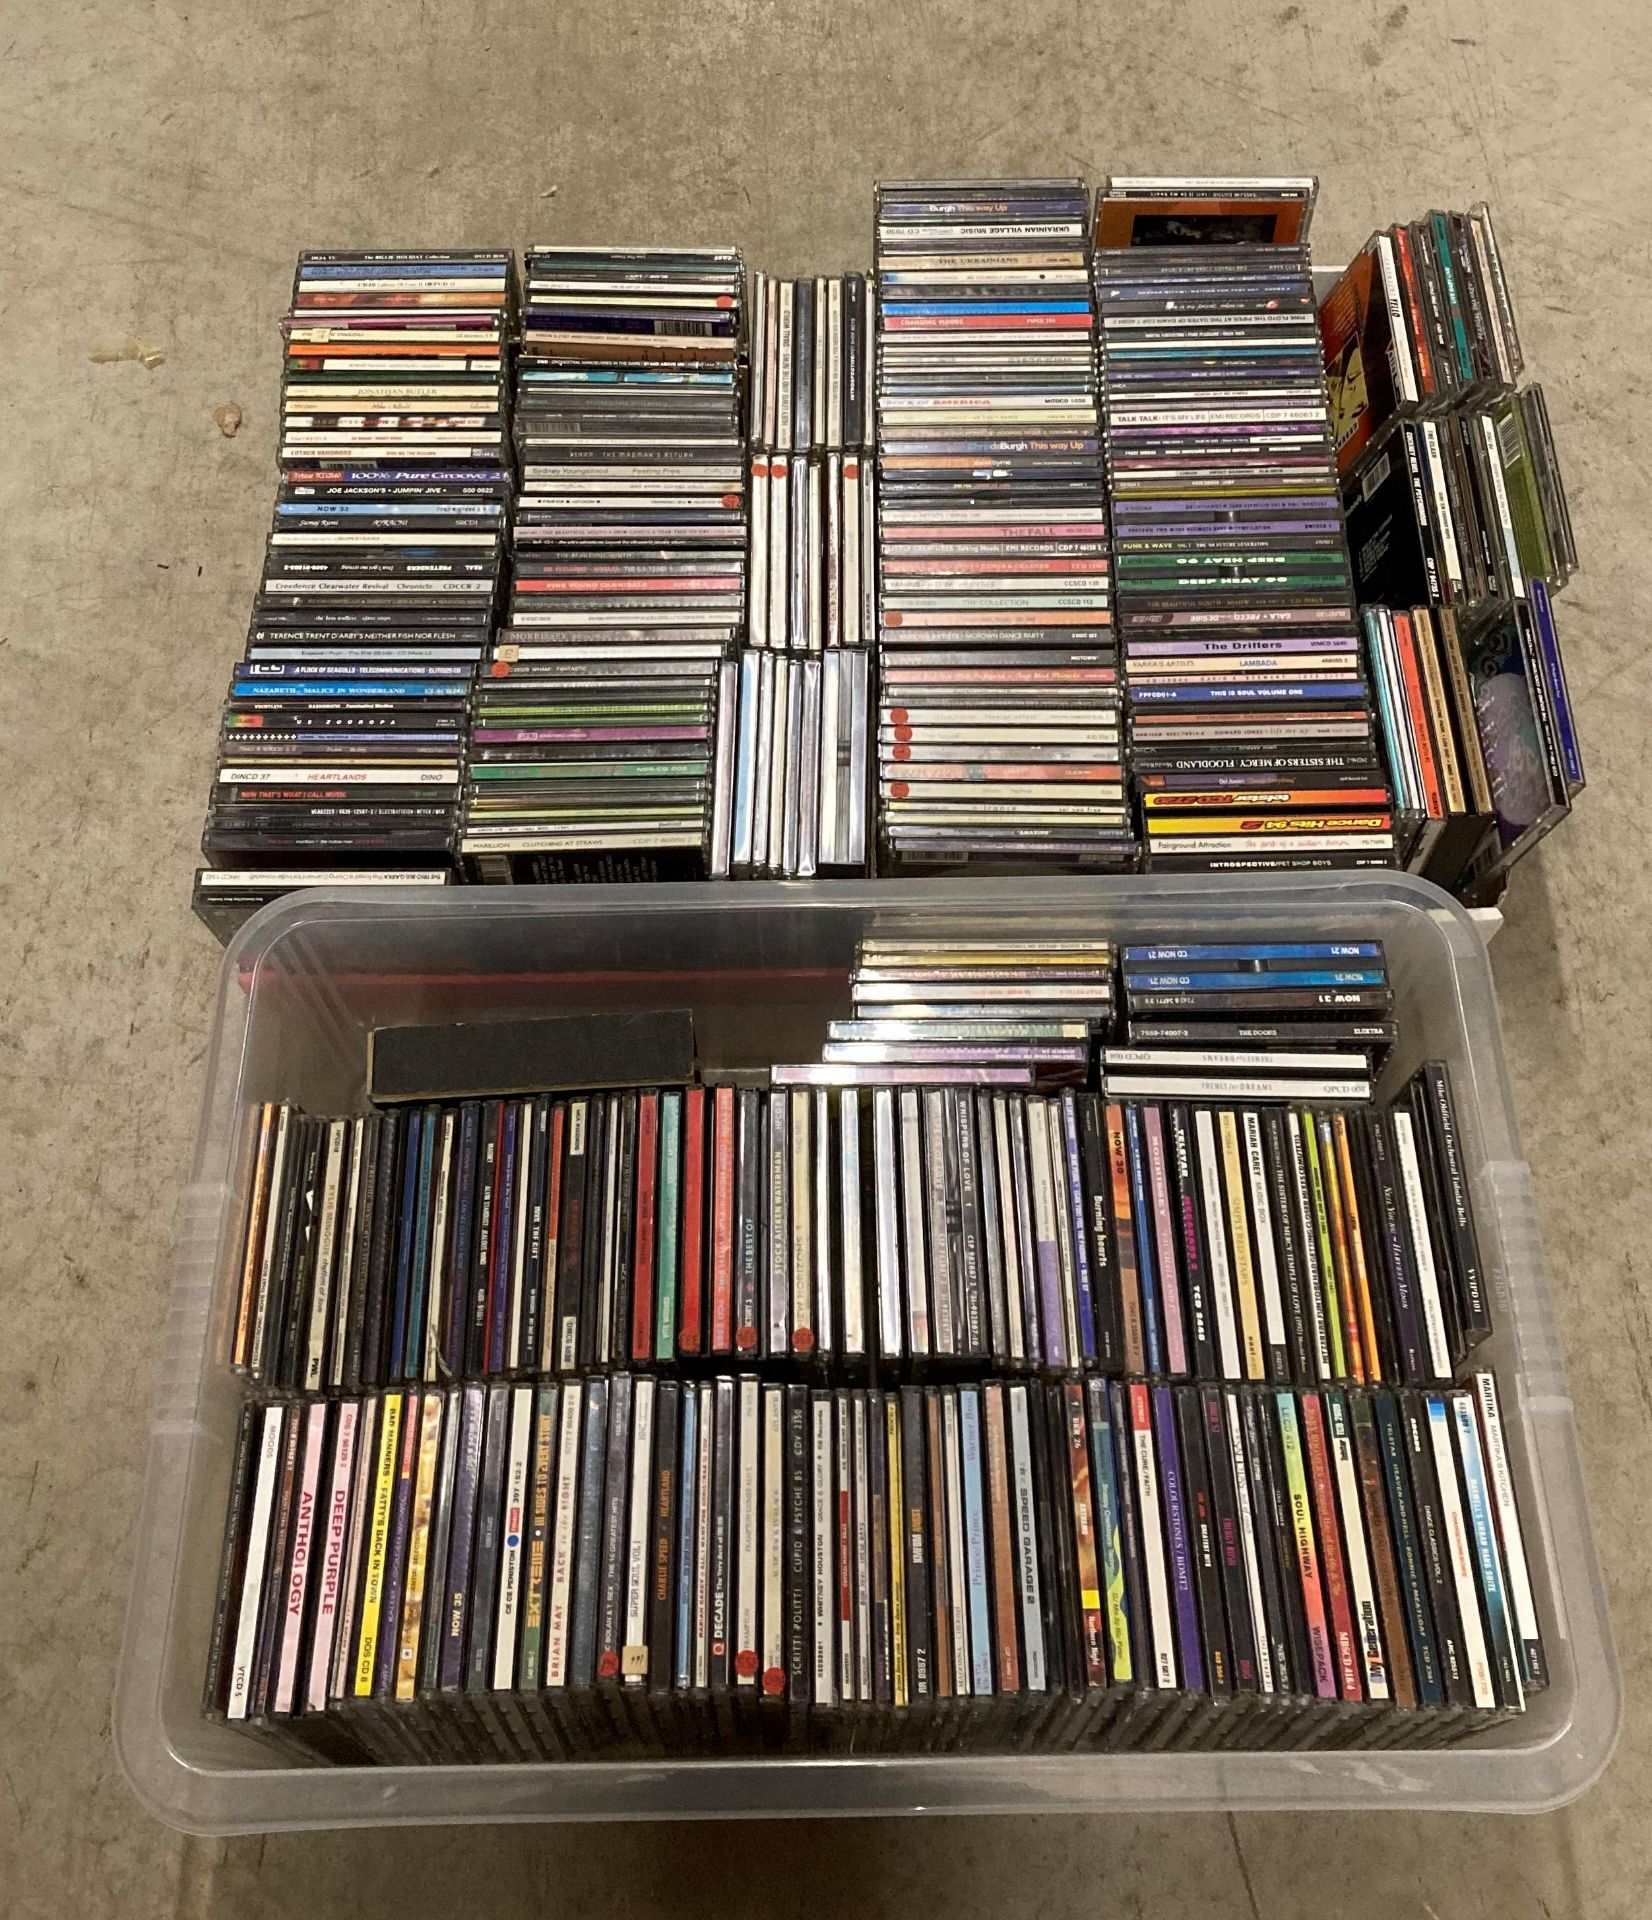 Approximately 330 assorted music CDs including singles and albums.